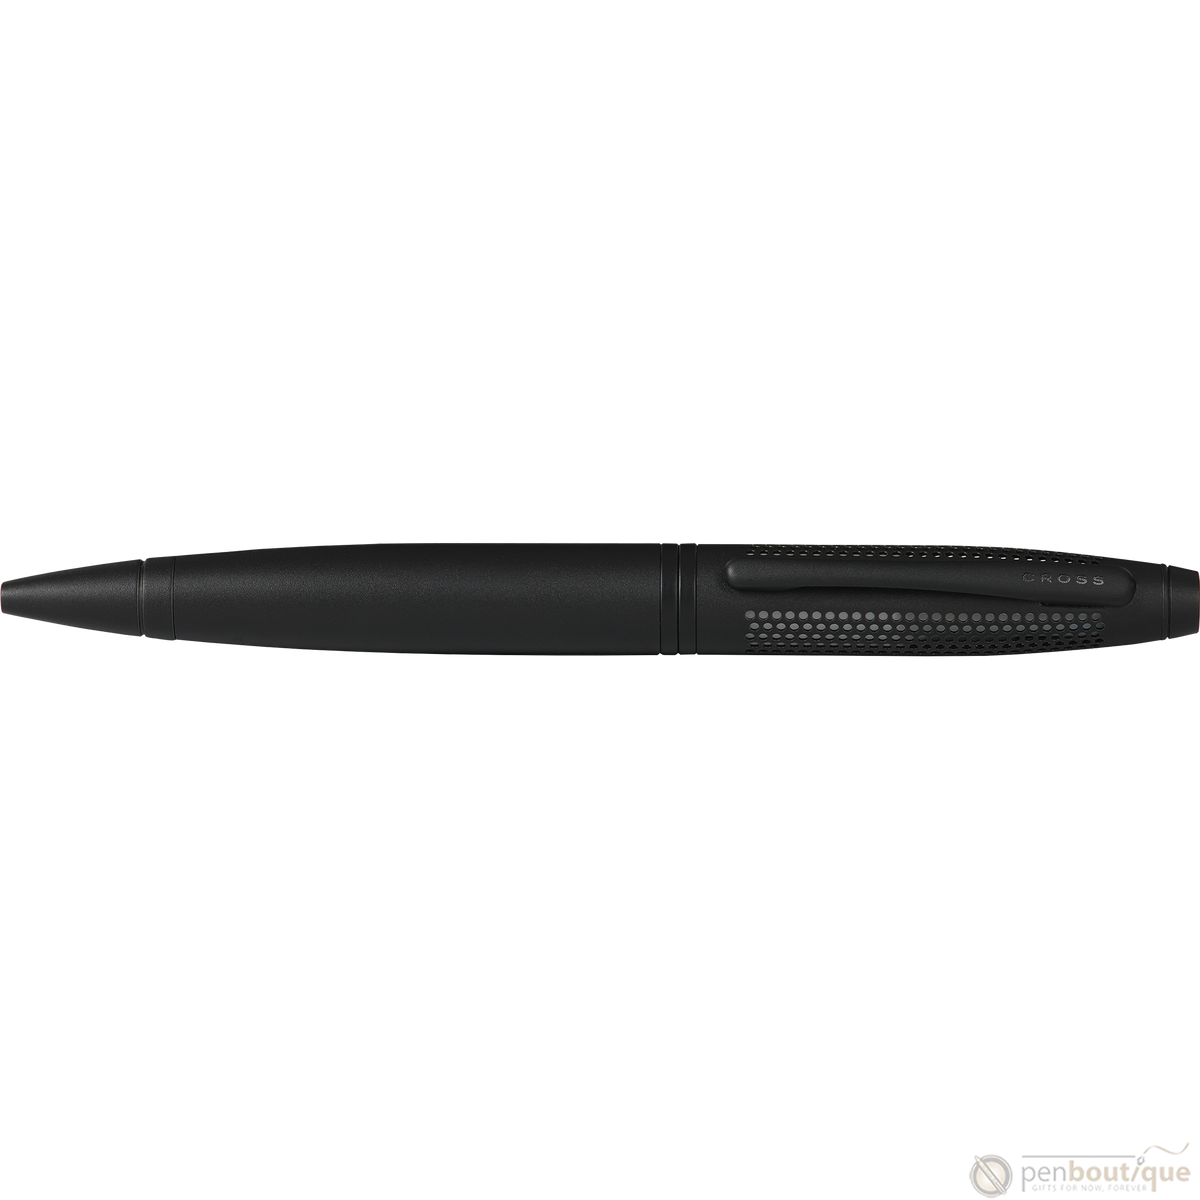 https://www.shoppenboutique.shop/wp-content/uploads/1692/66/all-our-valued-clients-will-get-a-fair-price-and-exceptional-customer-service-from-cross-lumina-ballpoint-pen-matte-black-cross-pens_6.png